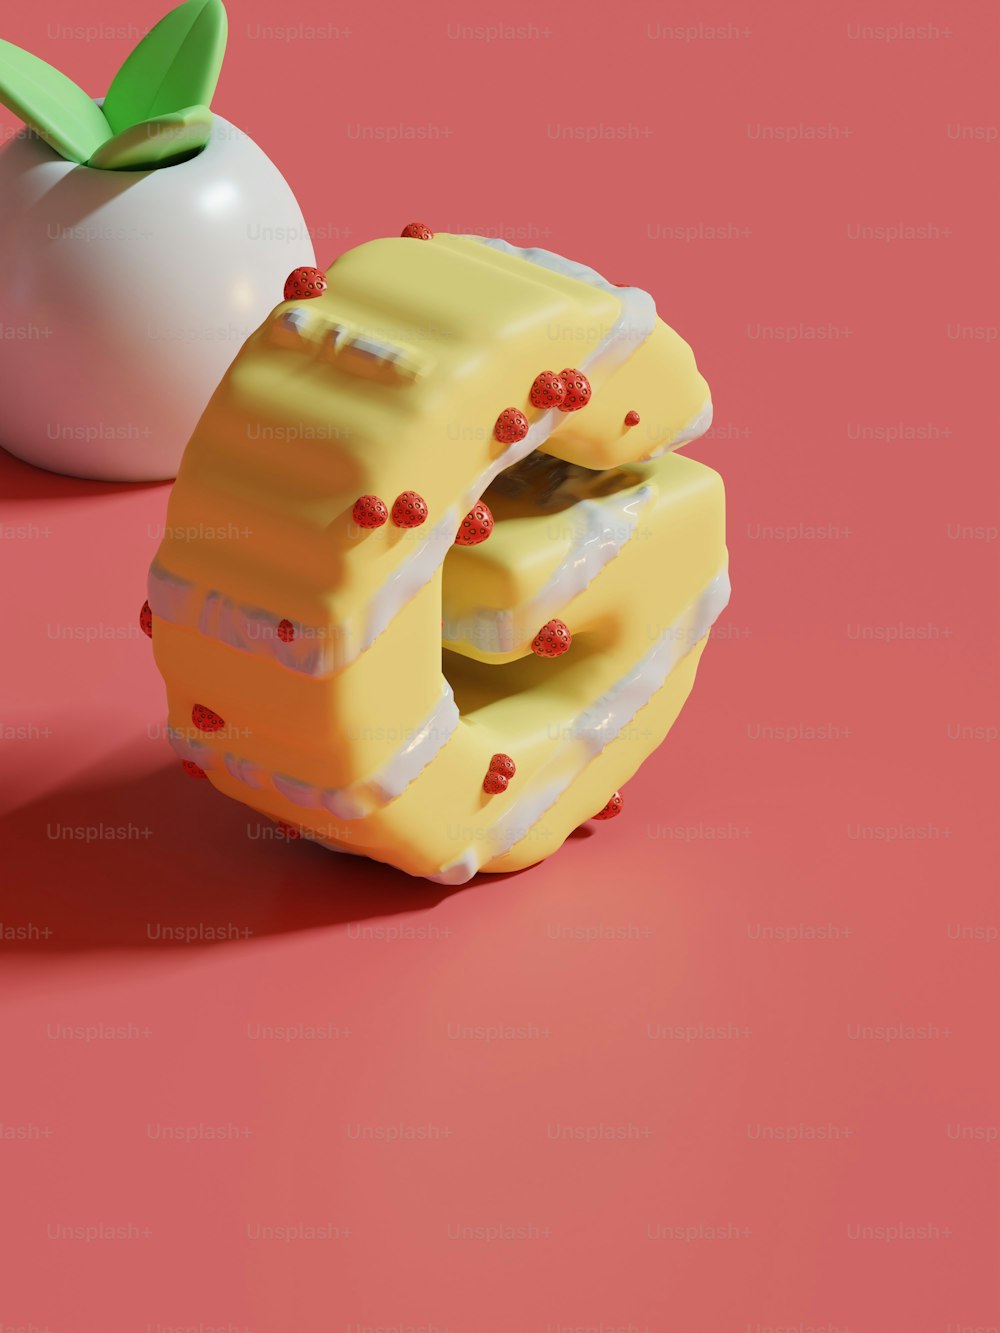 a piece of cake next to an apple on a pink surface